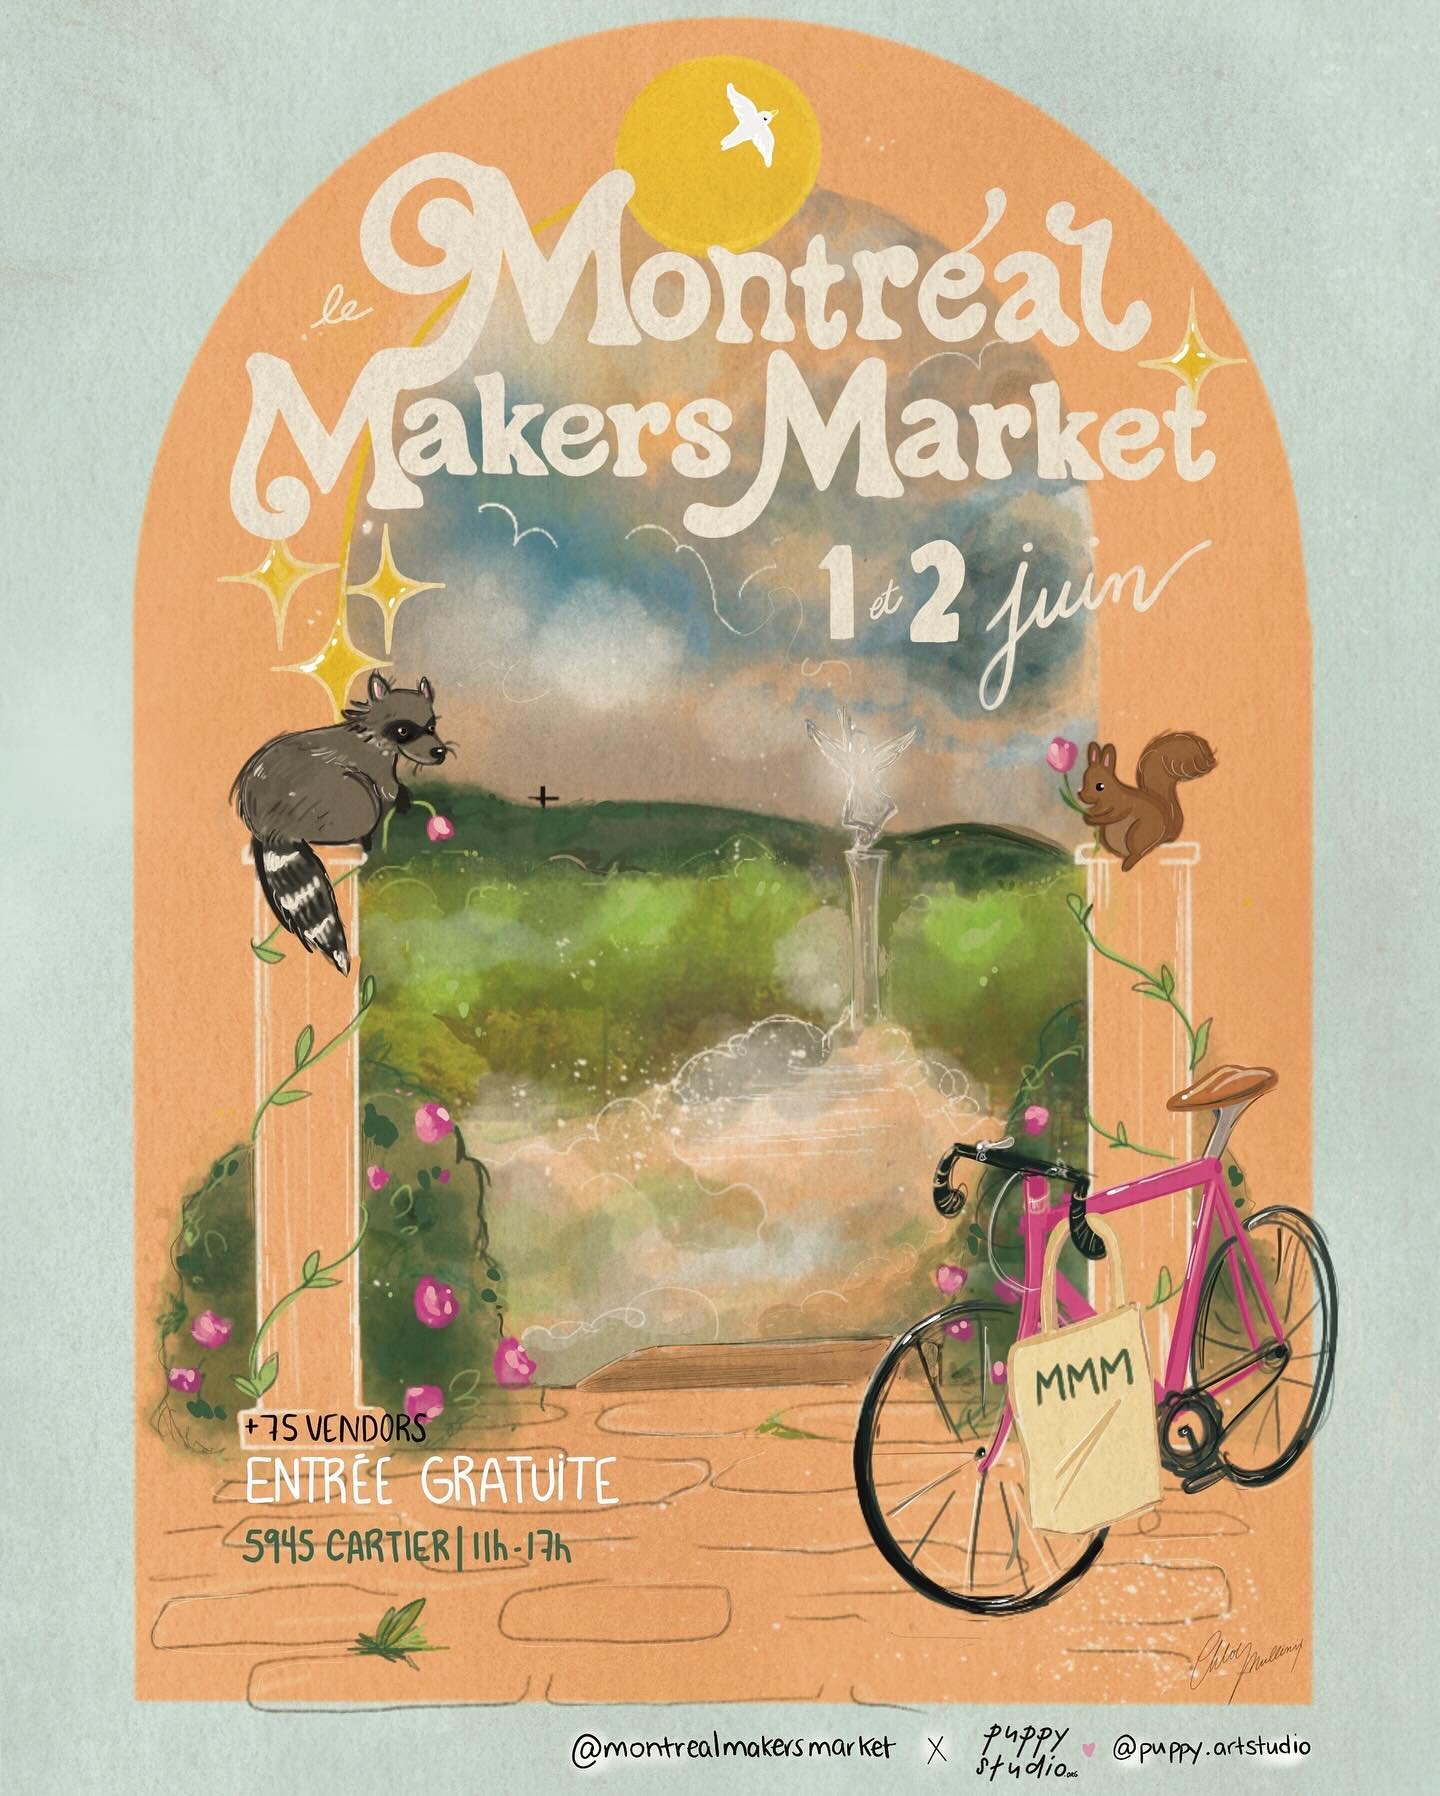 Hey 👋 we will be participating for the first time at @montrealmakersmarket JUNE 1st &amp; JUNE 2nd

Come by and check out this market, there will be a whole new set of talented artisans ⭐️⭐️⭐️⭐️⭐️

Art poster by @puppy.artstudio (I own a cute pendan